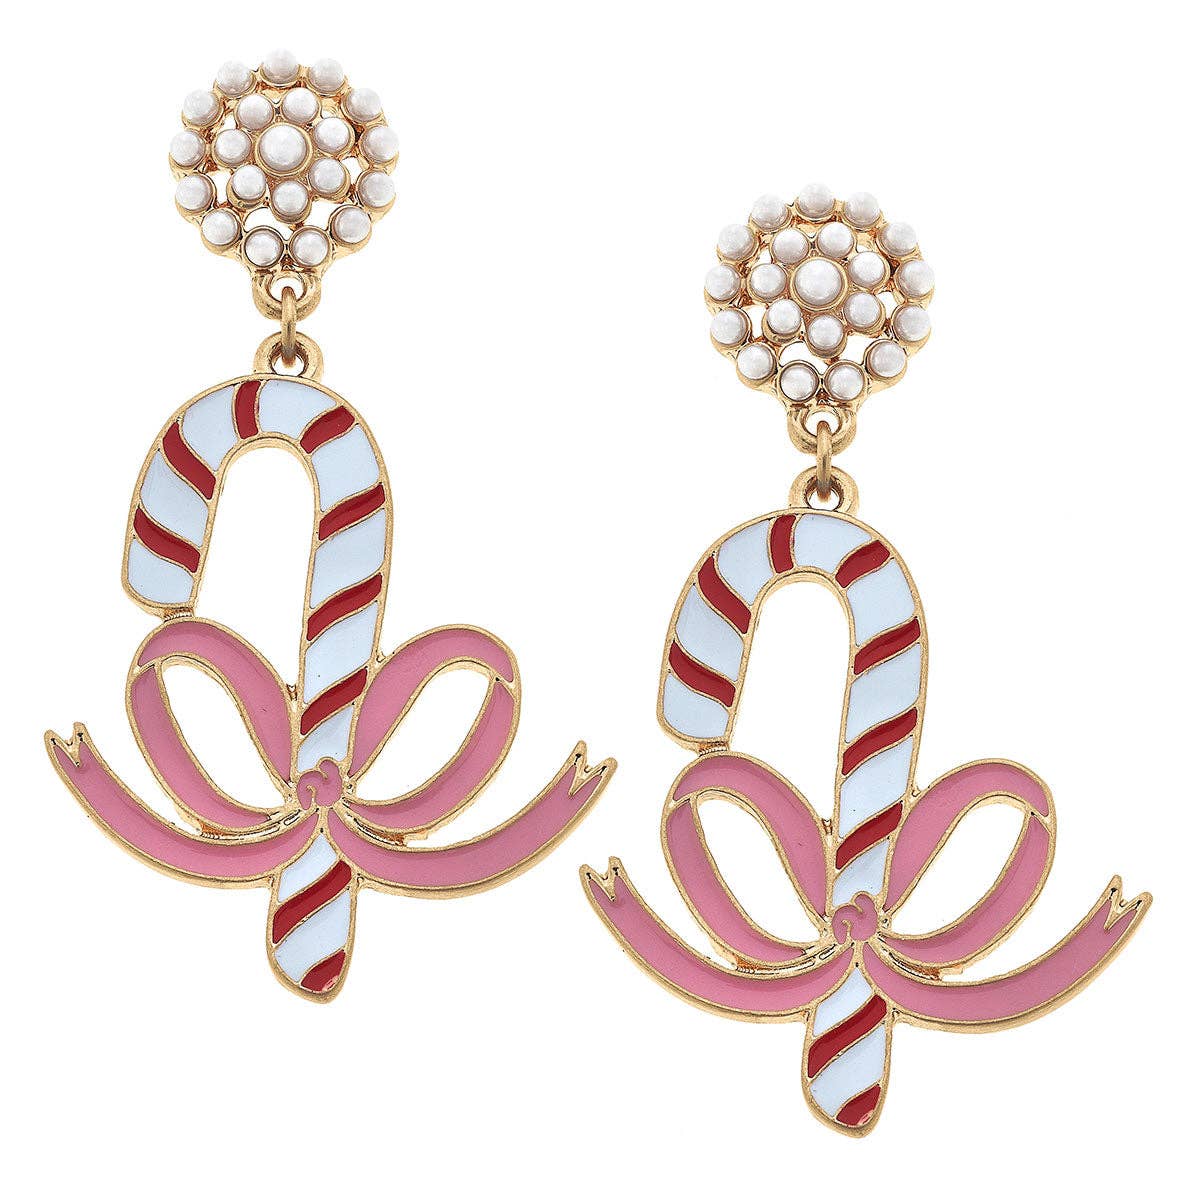 Candy Cane Earrings in Red, White & Pink